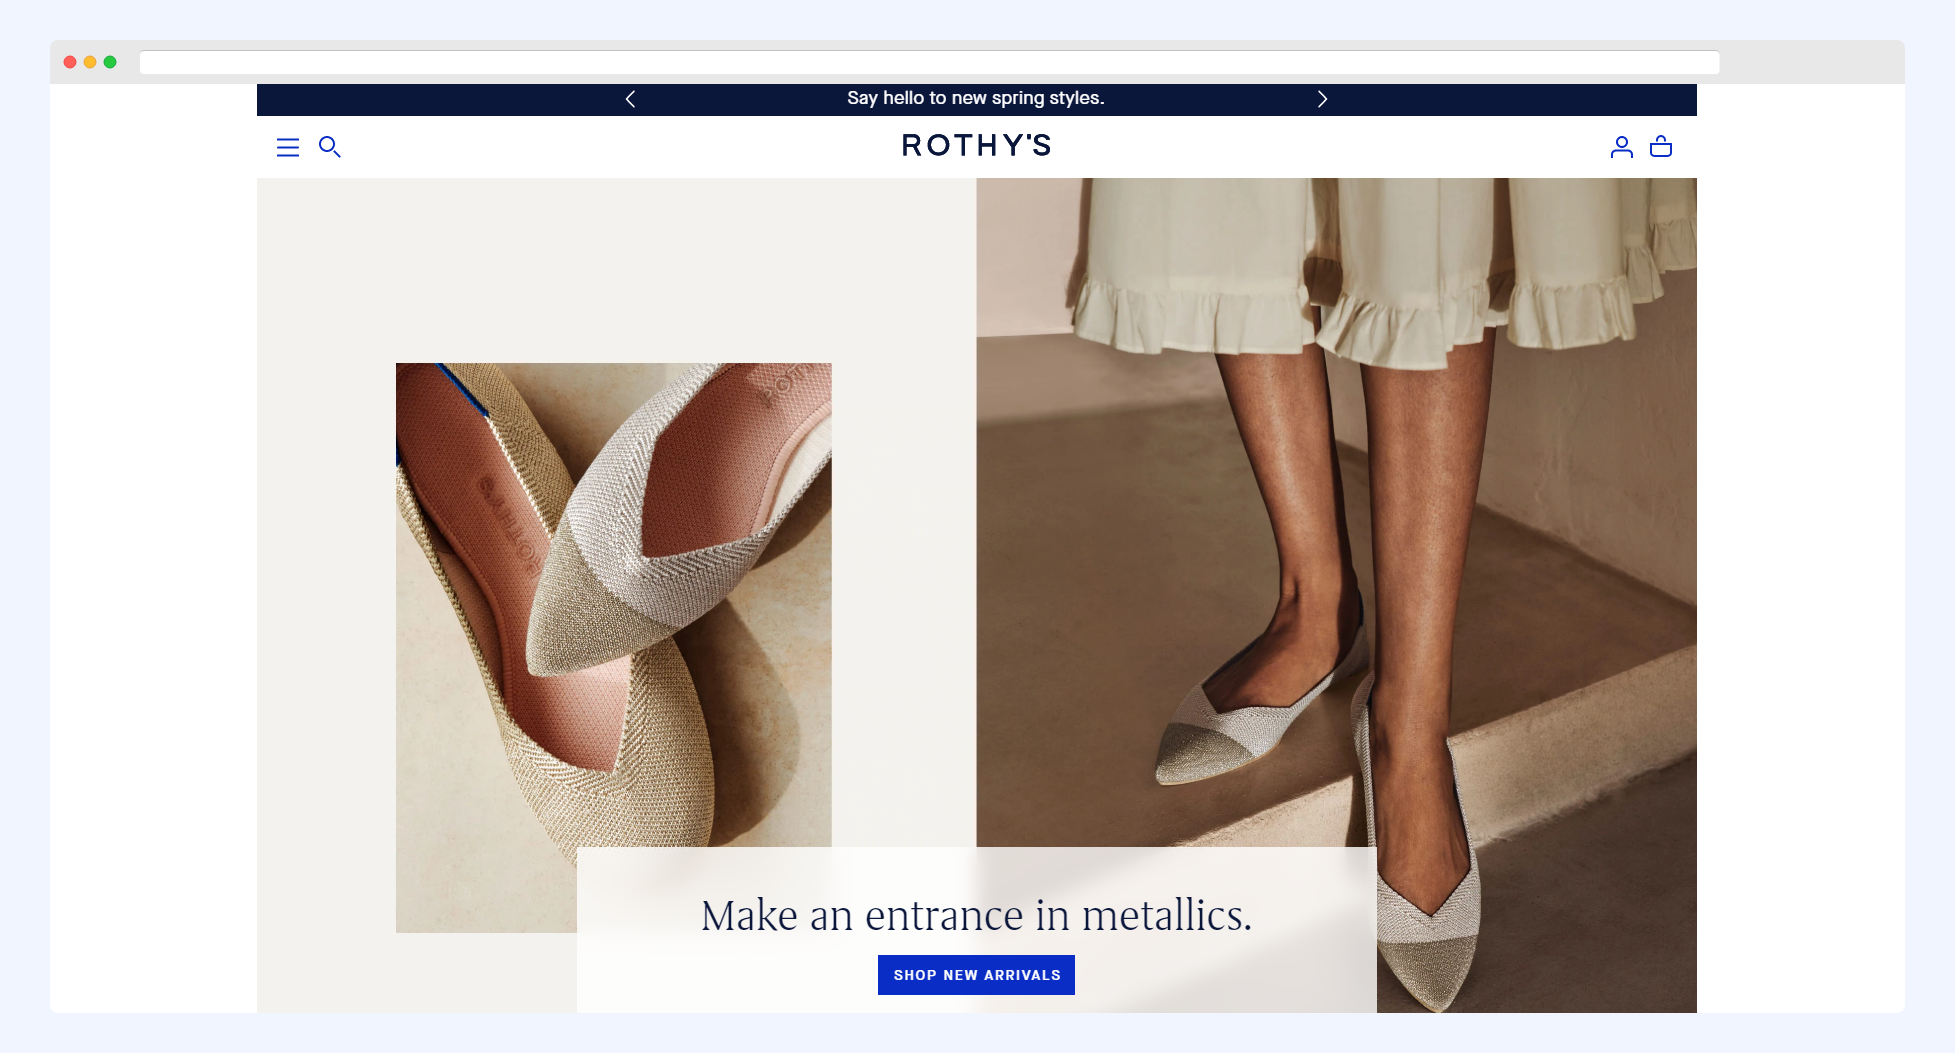 Rothy’s: How a billion-dollar sustainable shoe company uses data to guide growth